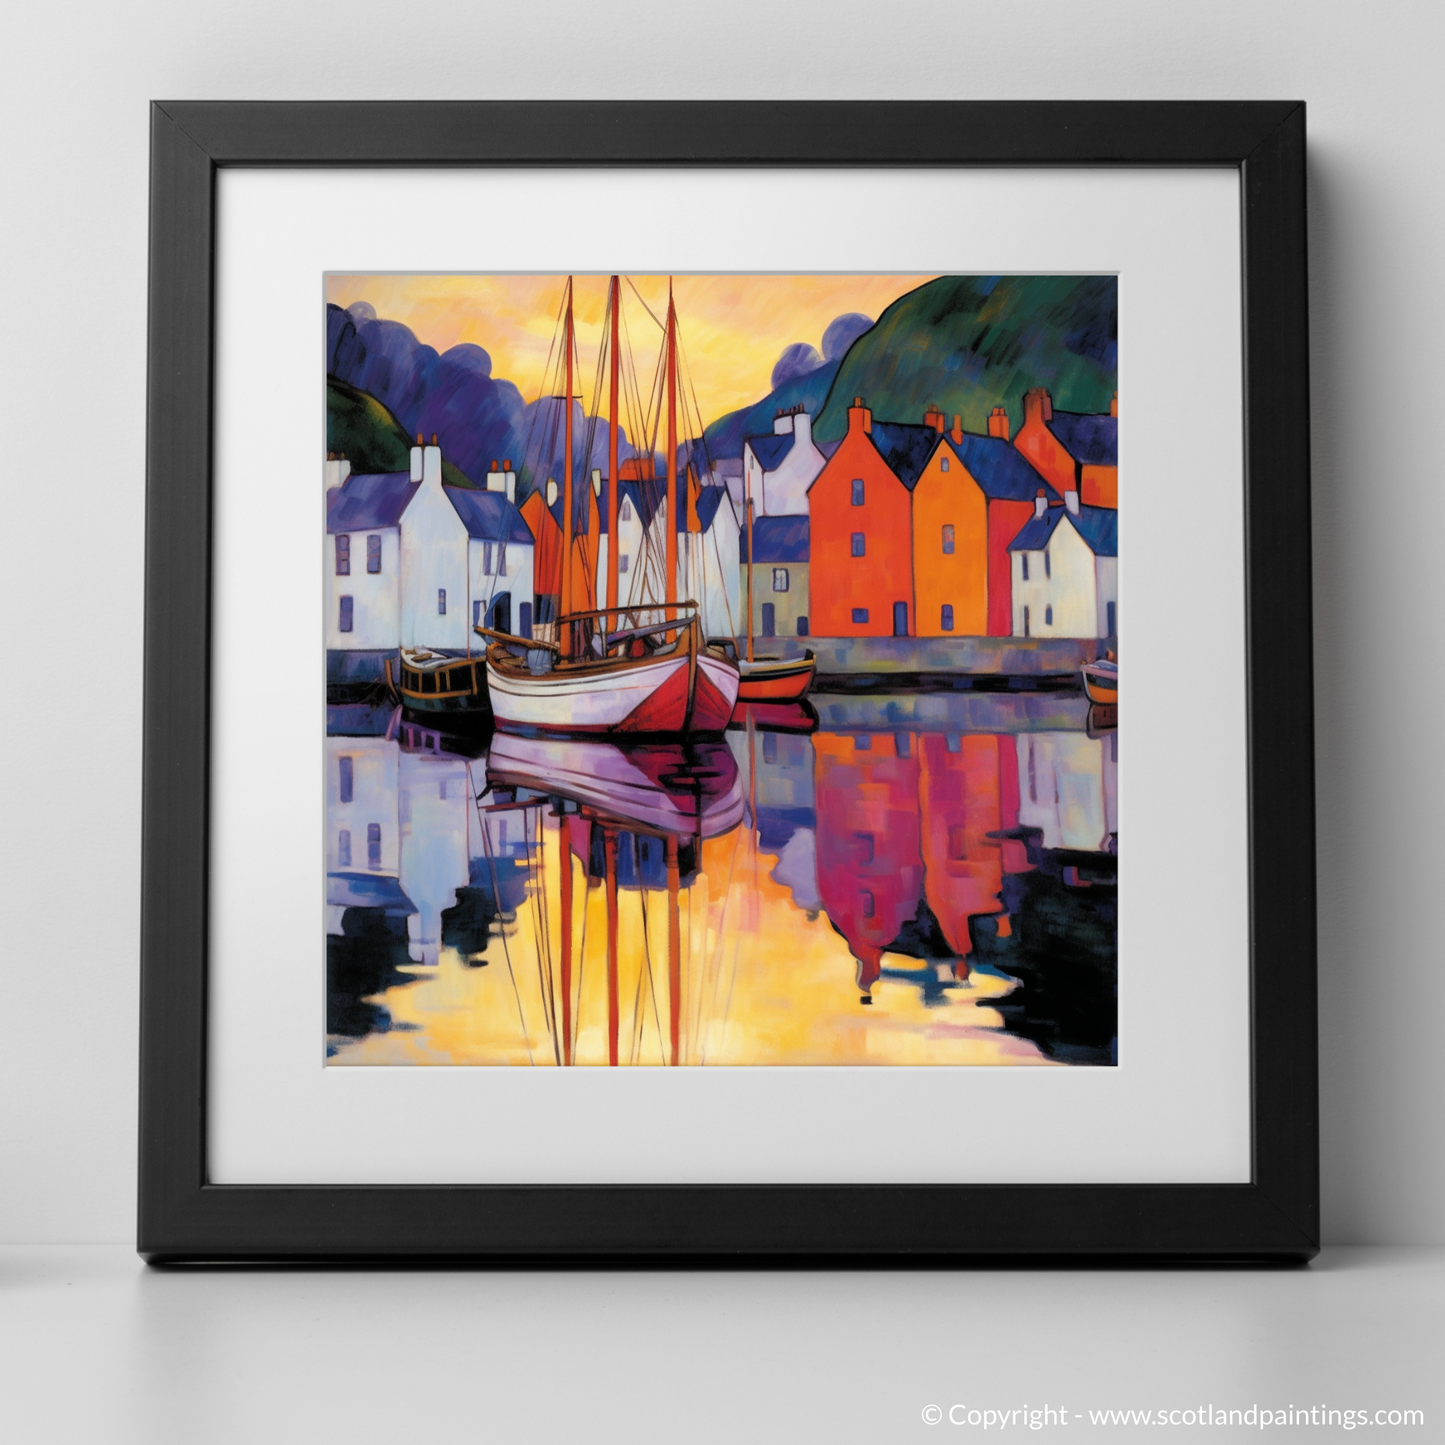 Twilight Serenity at Portree Harbour